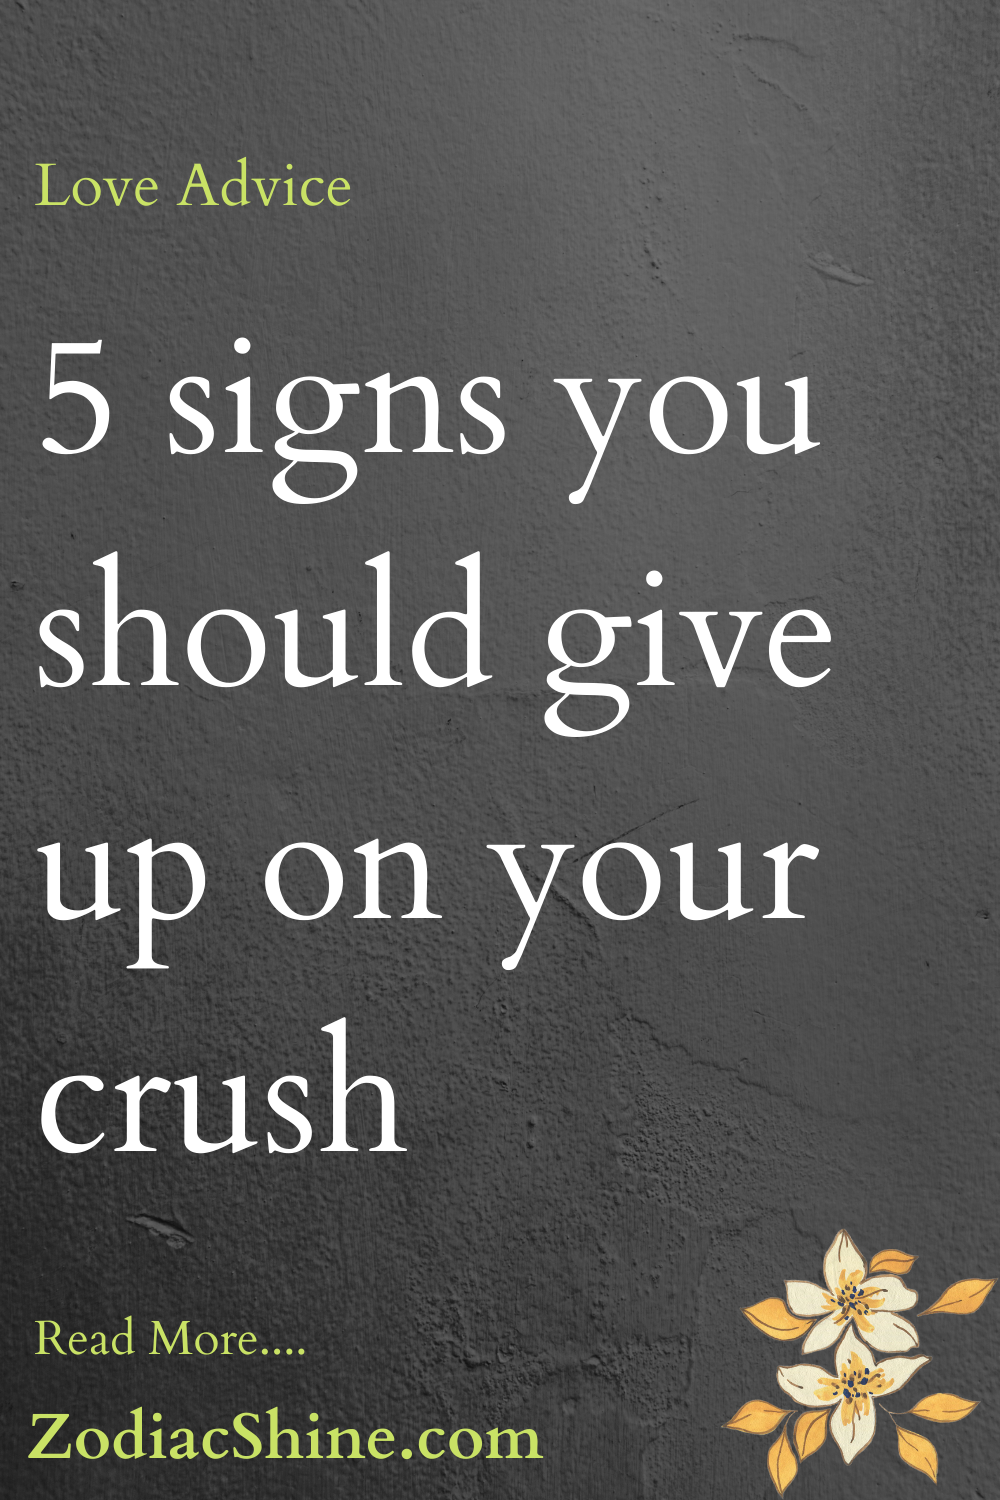 5 signs you should give up on your crush